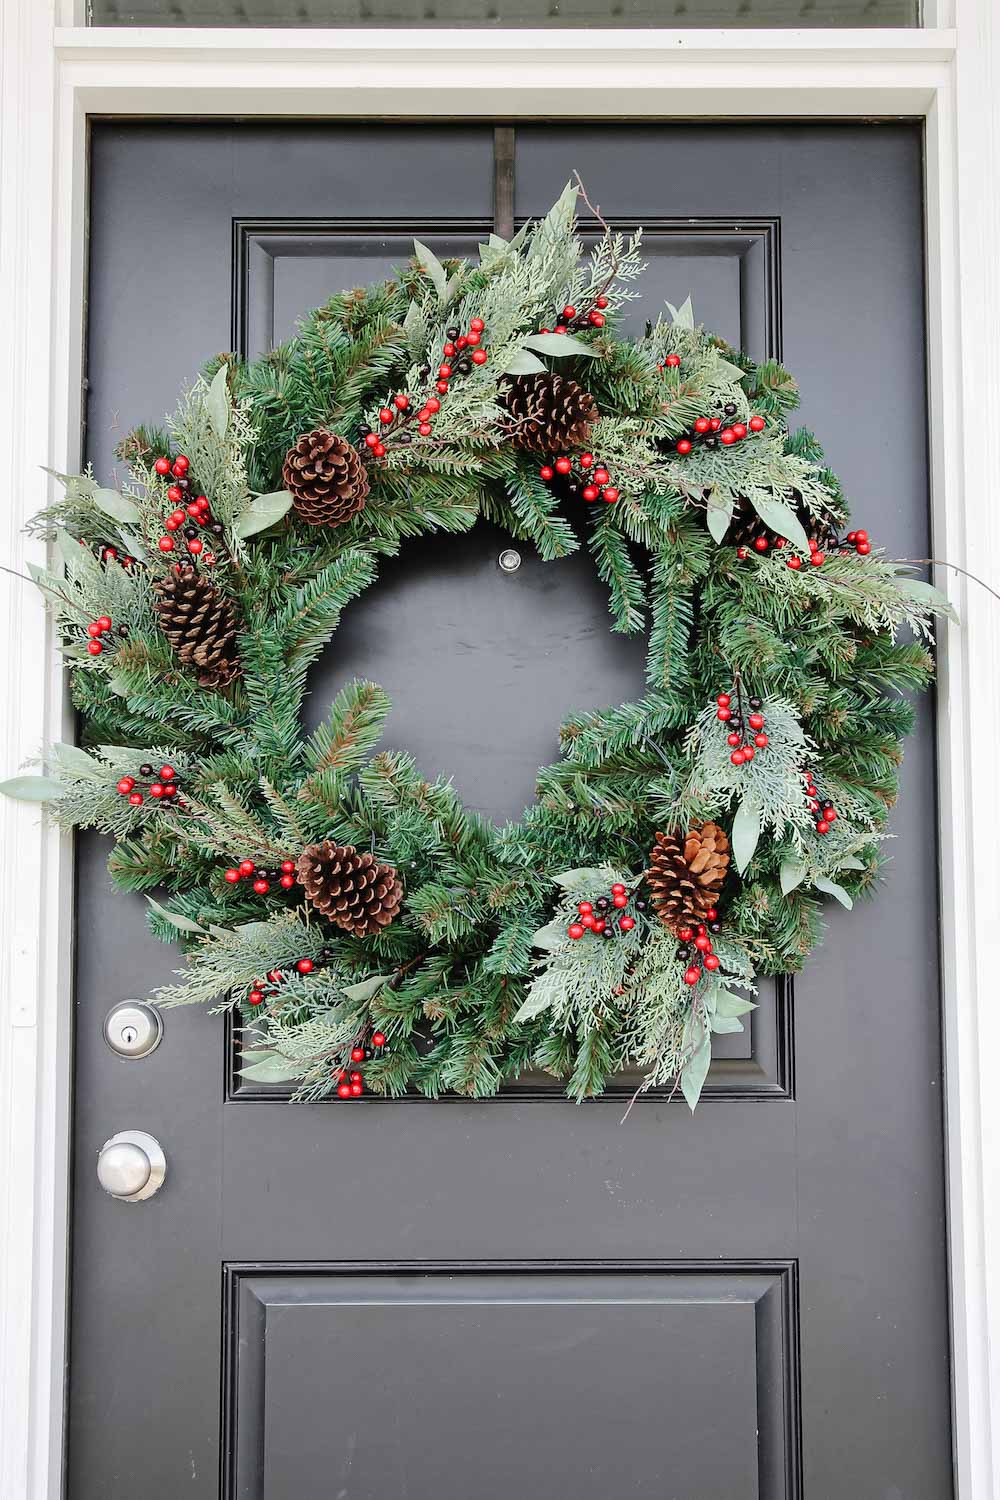  An oversized holiday wreath with pine cones and red berries hanging on black door